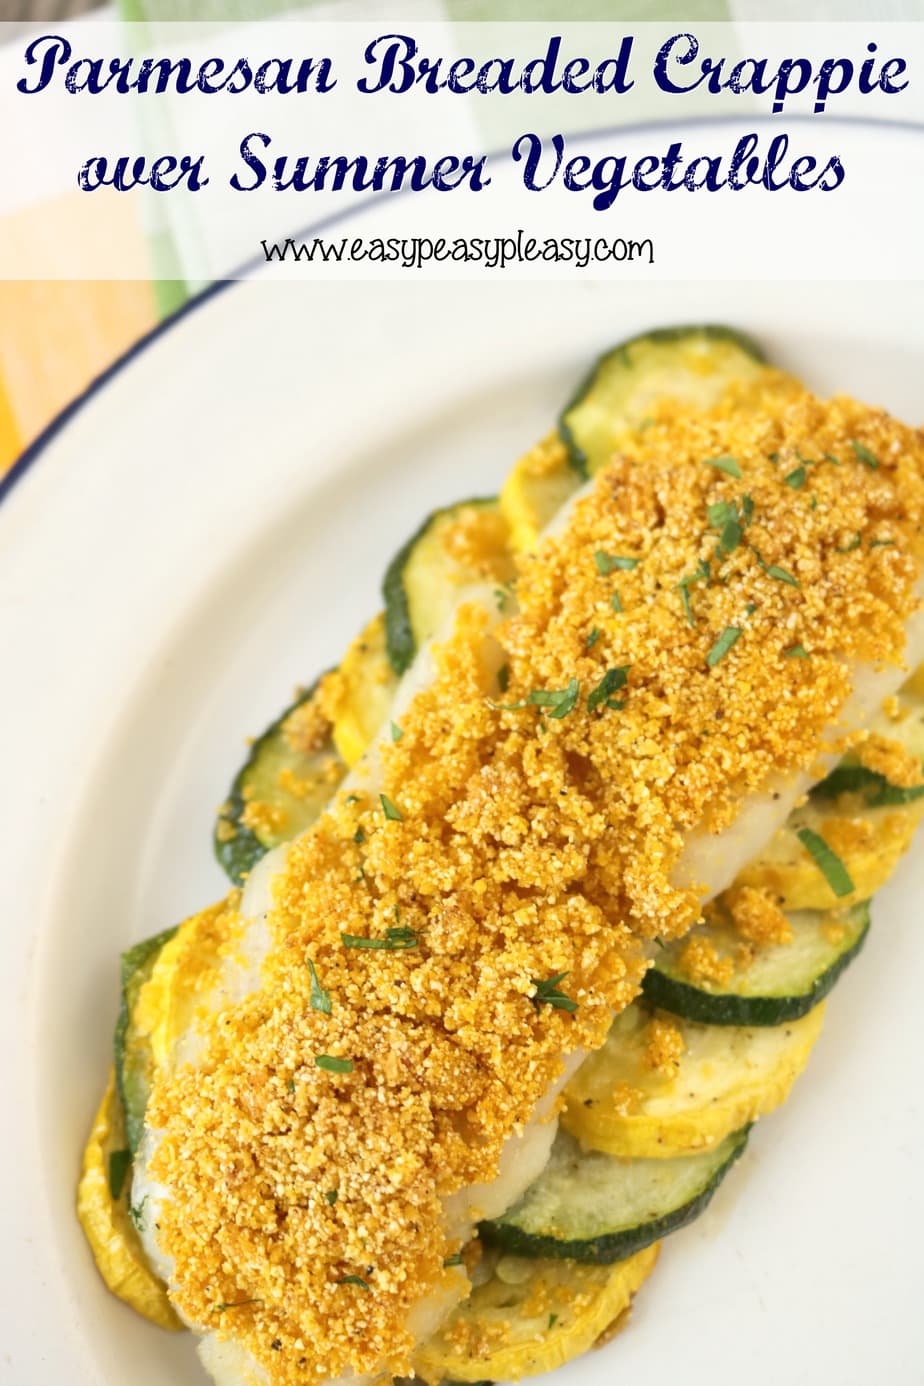 Looking for a non-fried fish recipe This Parmesan Breaded Crappie over Summer Vegetables recipe is super easy and delicious.